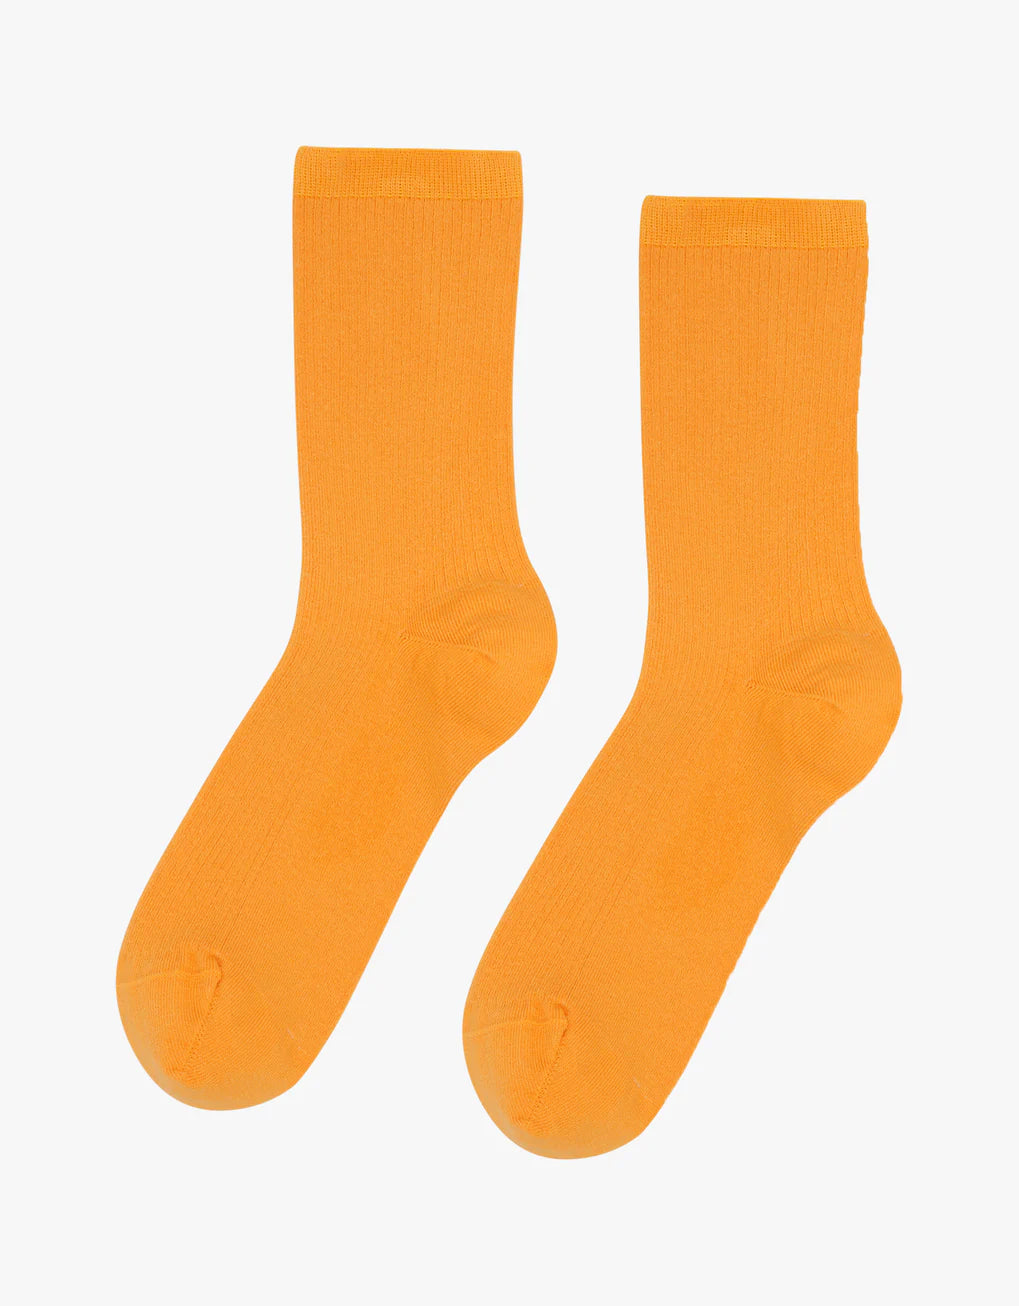 A pair of seamless and breathable Colorful Standard Classic Organic Socks on a white background.